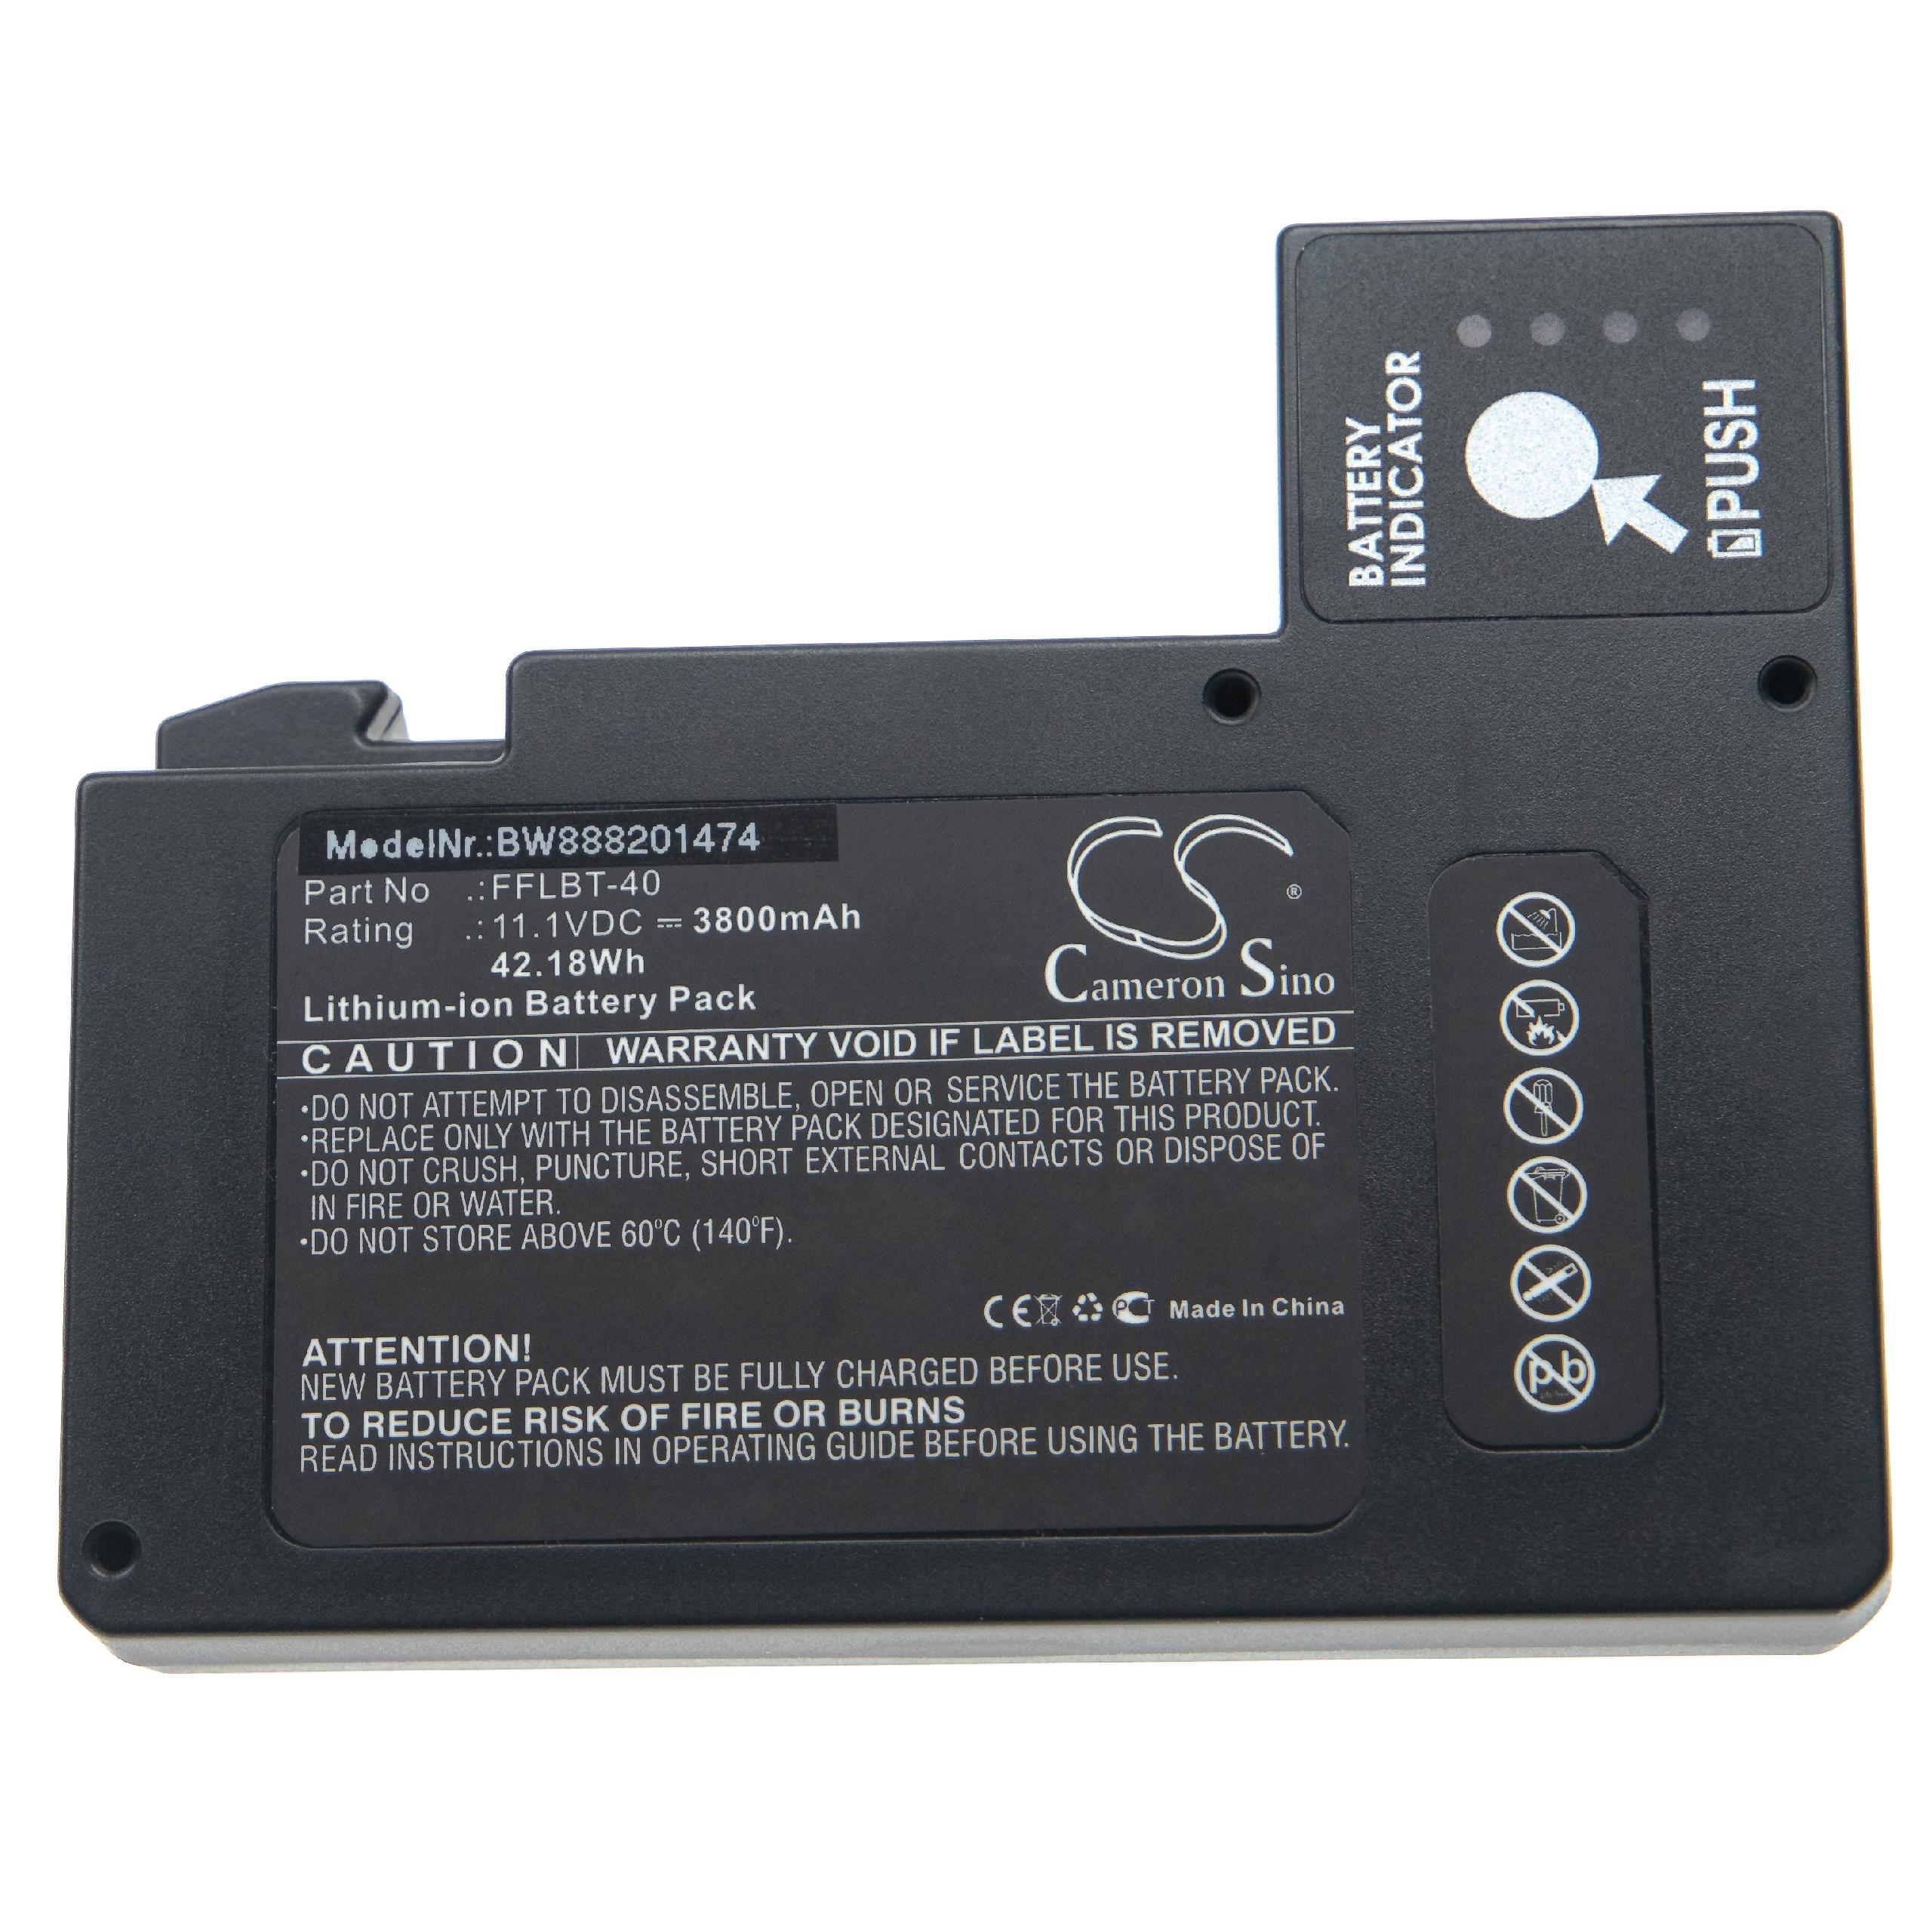 Fusion Splicer Battery Replacement for INNO FFLBT-40 - 3800mAh 11.1V Li-Ion